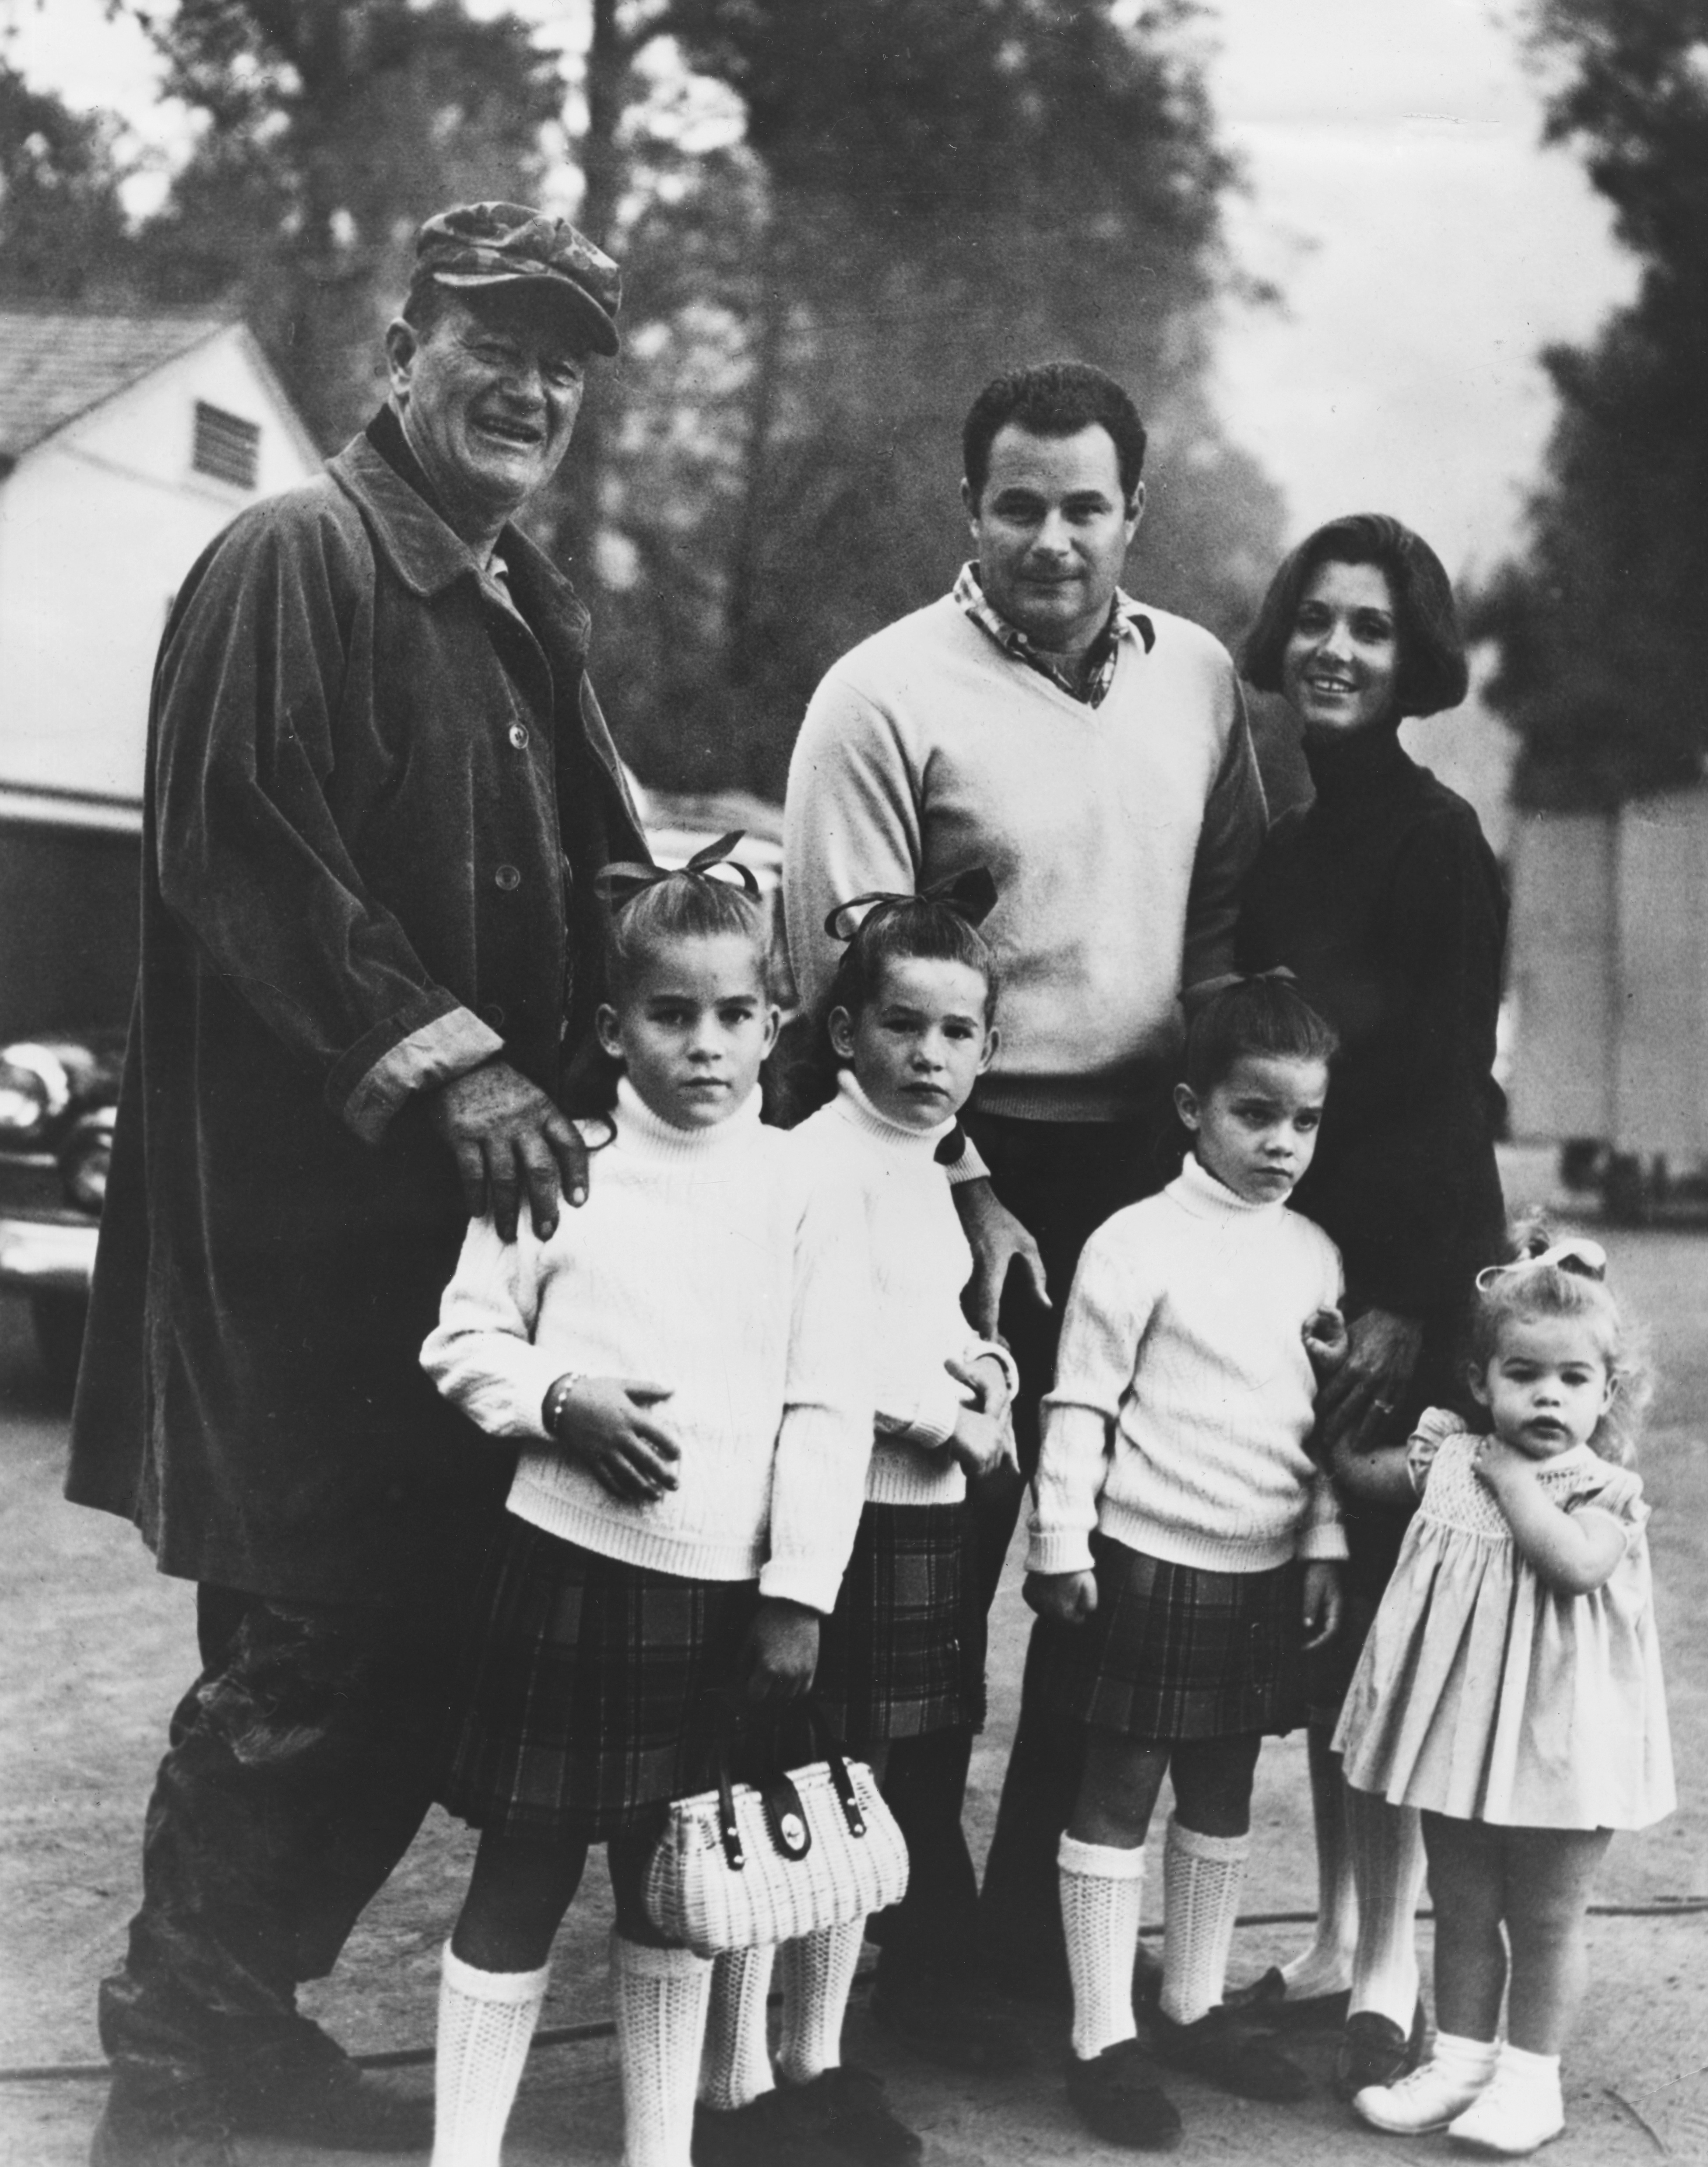 John Wayne with his son Michael Wayne, his daughter-in-law Gretchen, and his granddaughters Alicia, Maria, Teresa and Josephine on March 19, 1968. | Source: Getty Images